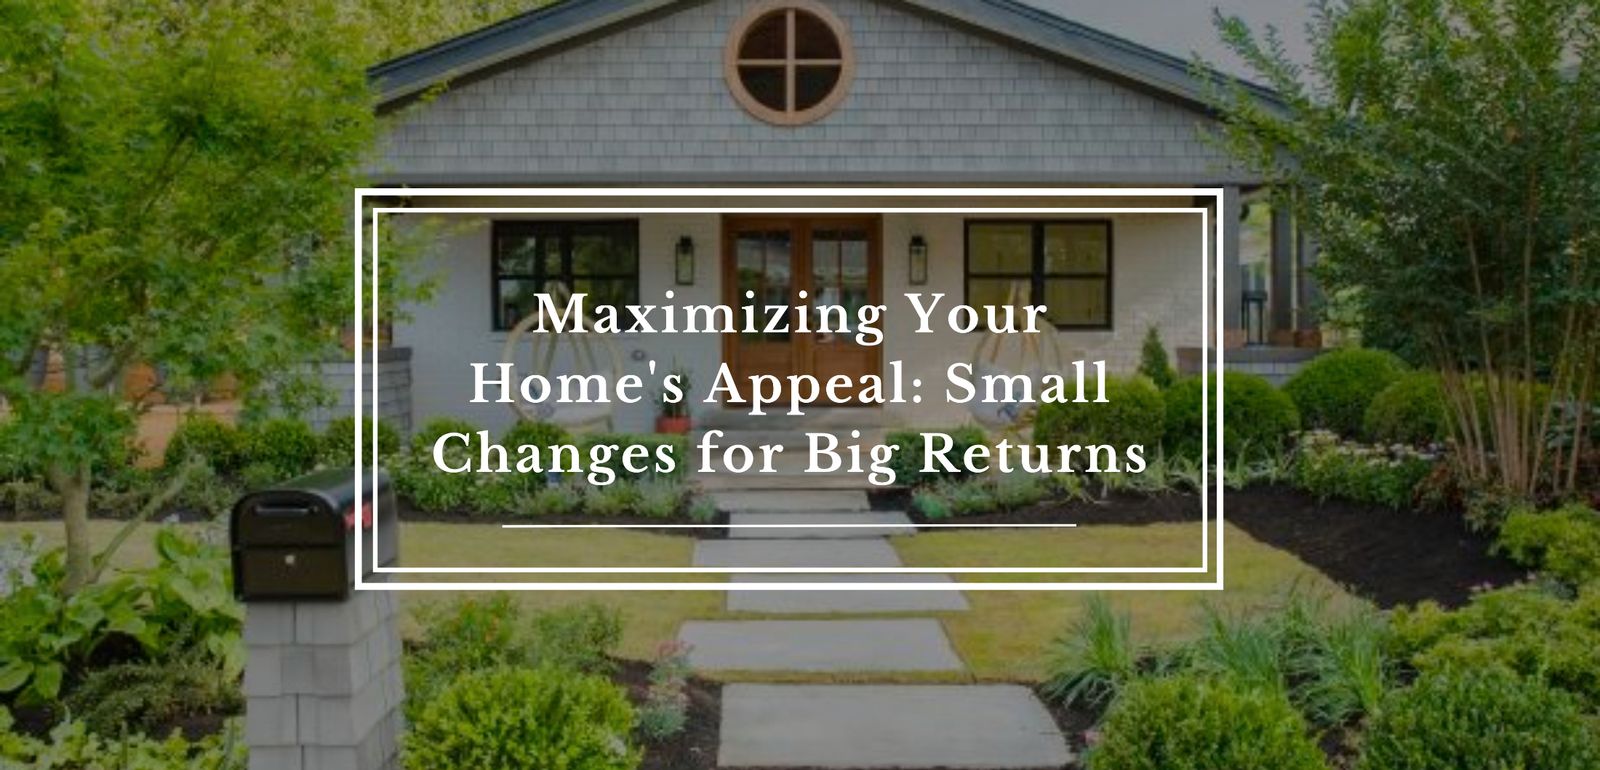 Maximizing Your Home's Appeal: Small Changes for Big Returns